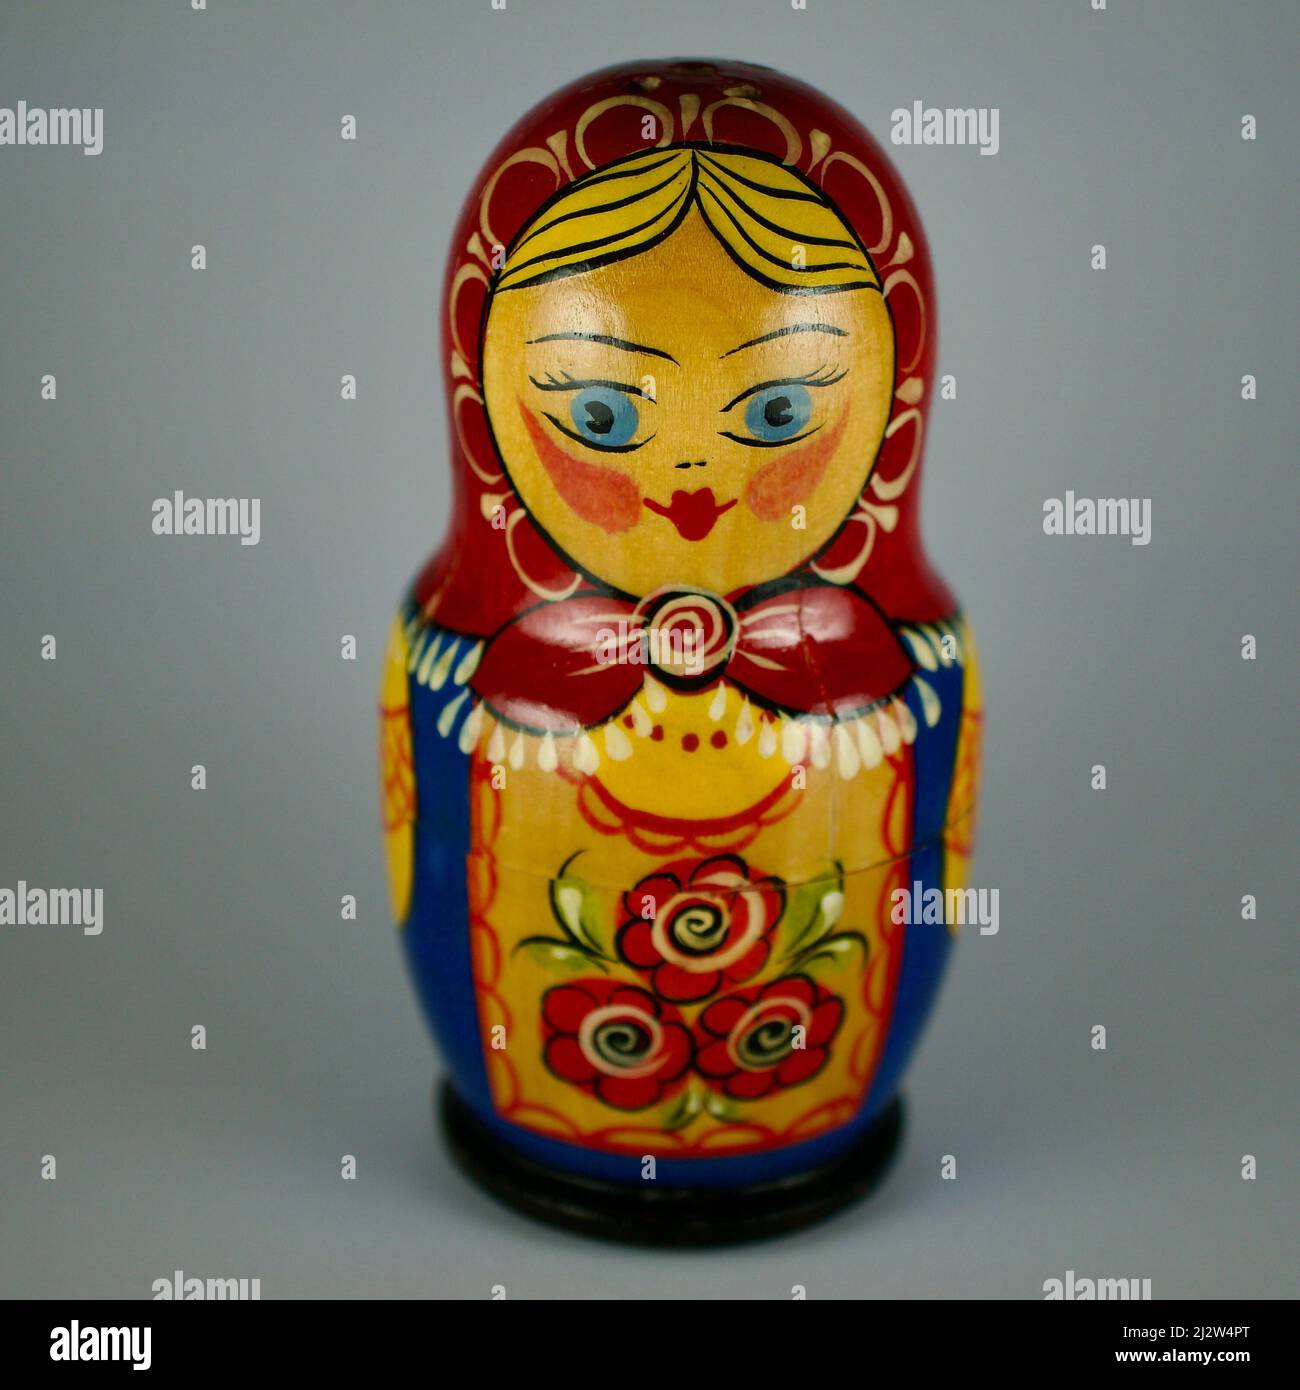 Matryoshka doll produced for tourism and promotional purposes in Russia. The only matryoshka doll. Russian culture local souvenir doll. Stock Photo